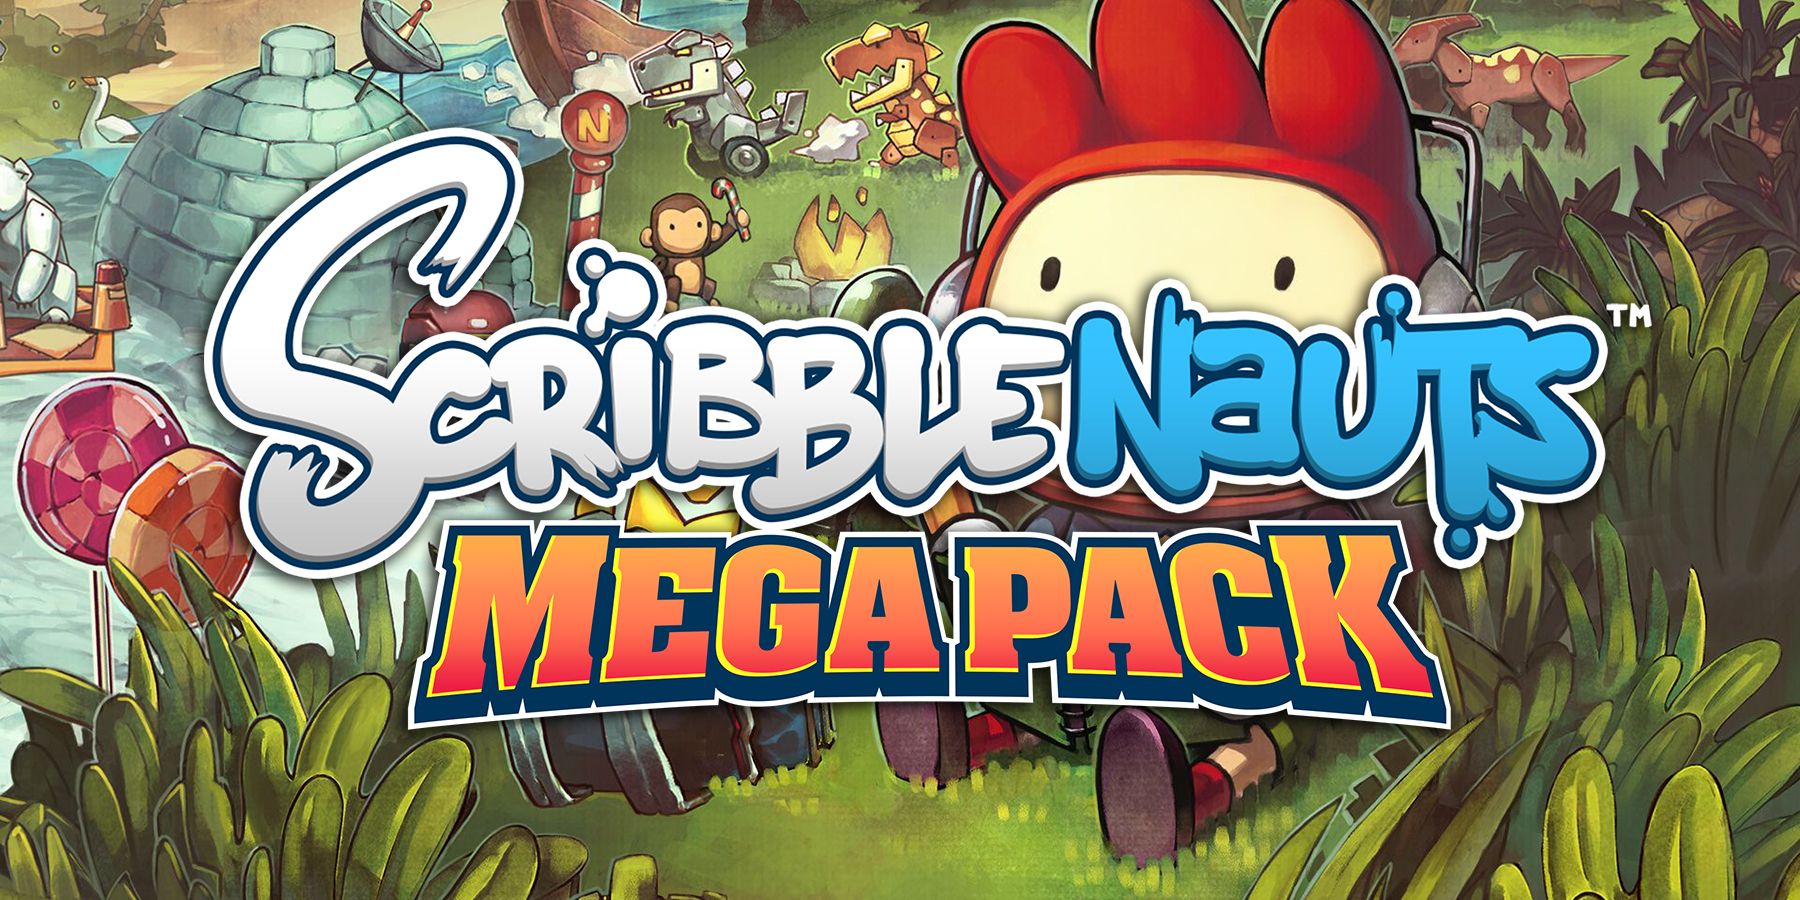 Scribblenauts Mega Pack cover art with text displaying the title with protagonist behind it.